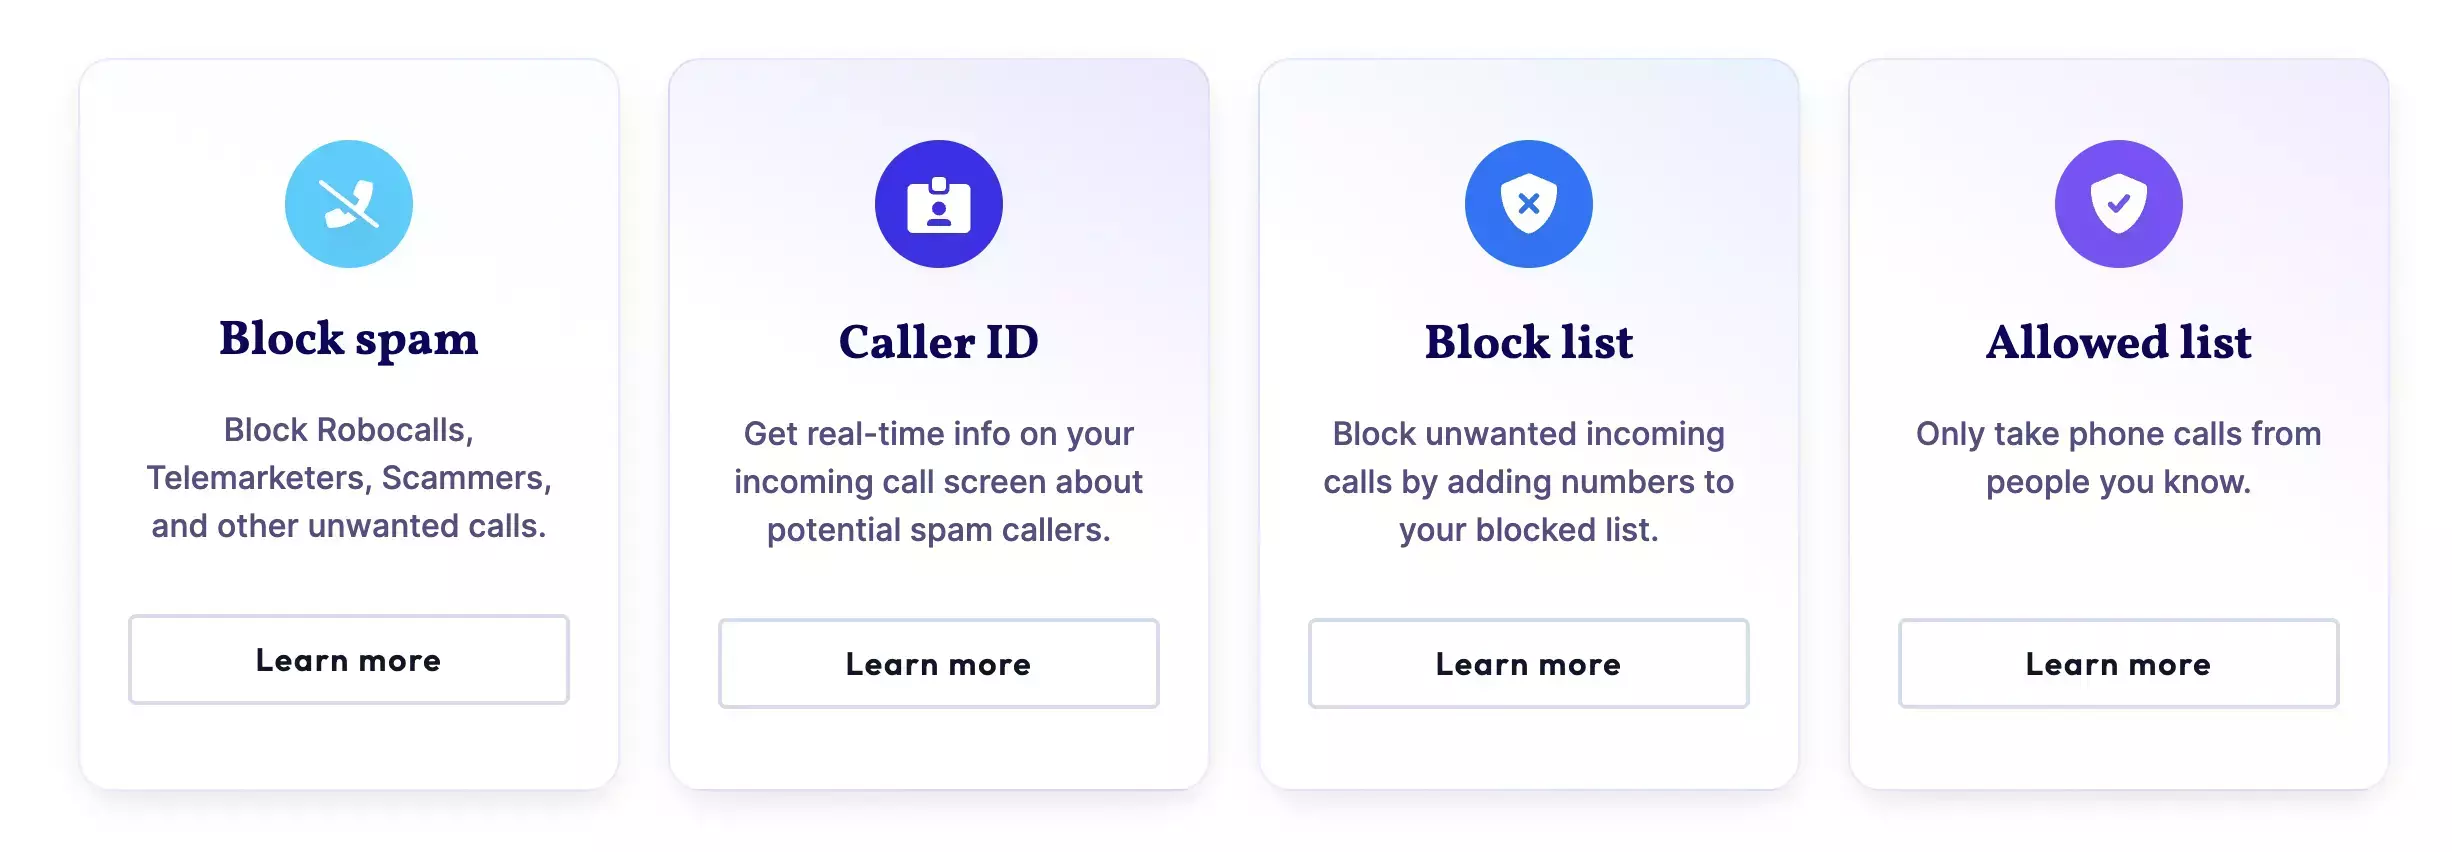 Image of spam call blocker services